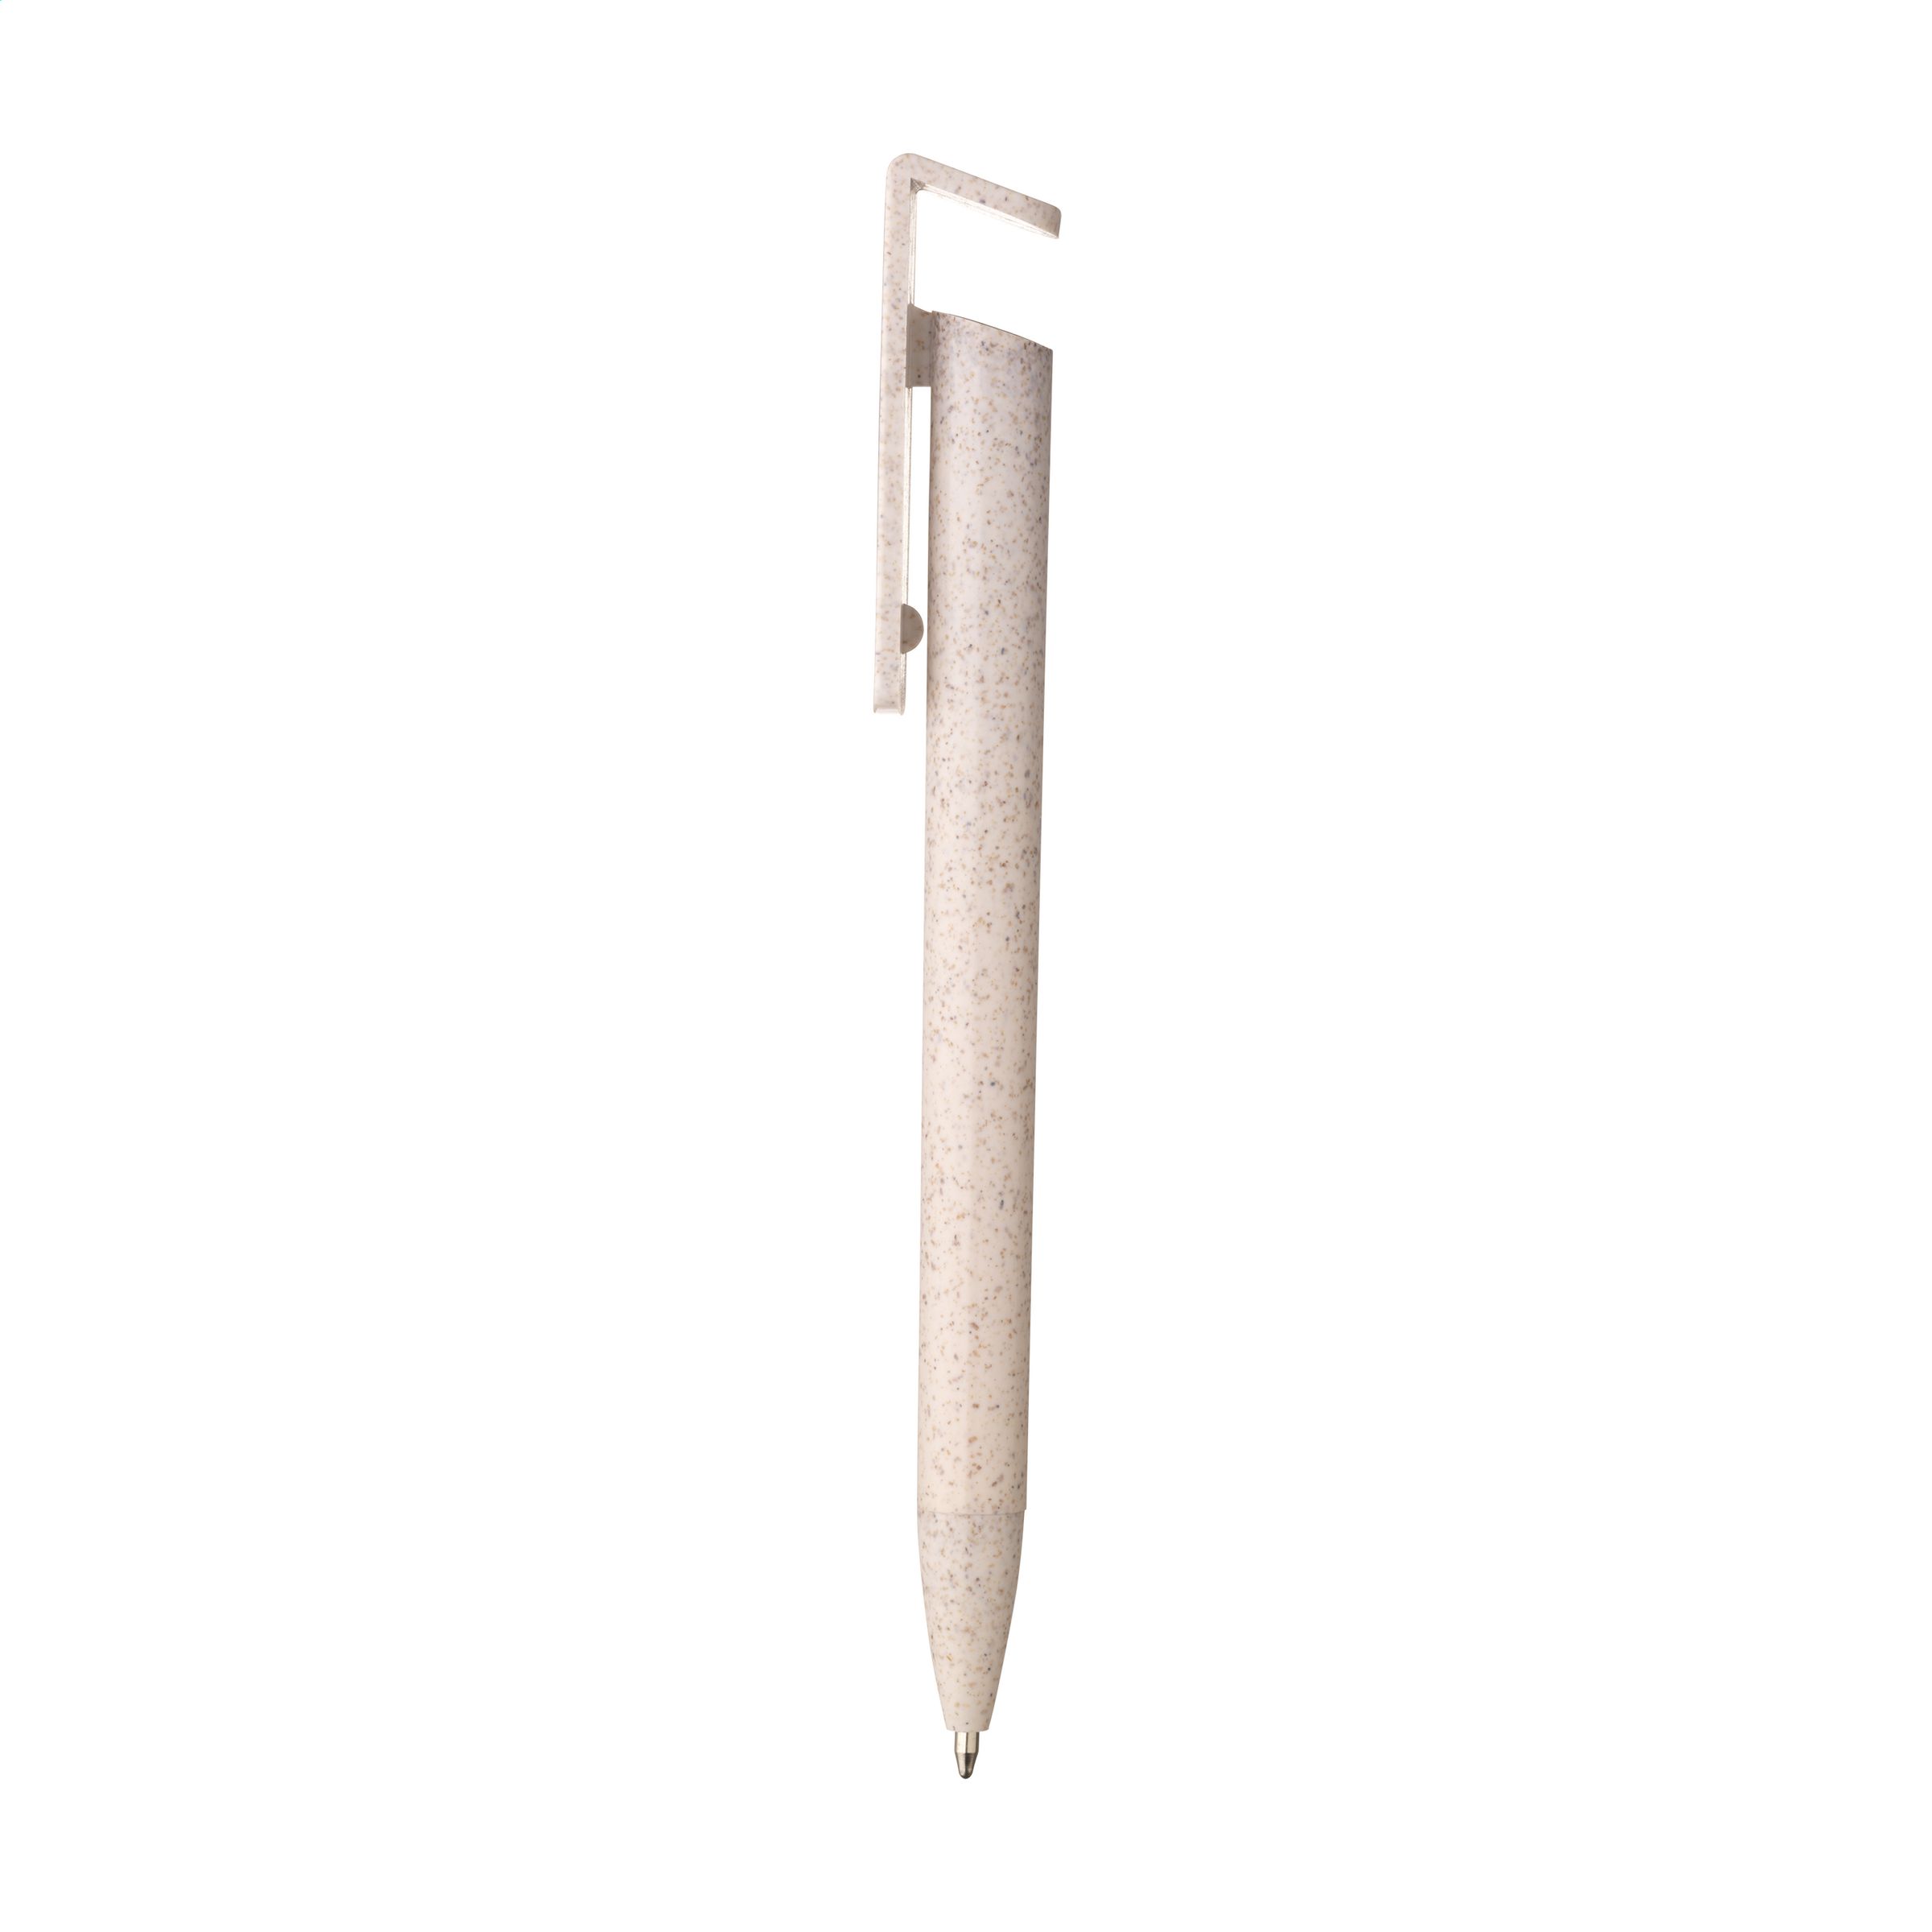 A ballpoint pen which uses blue ink, made from wheat waste, and includes a phone stand. - Liss